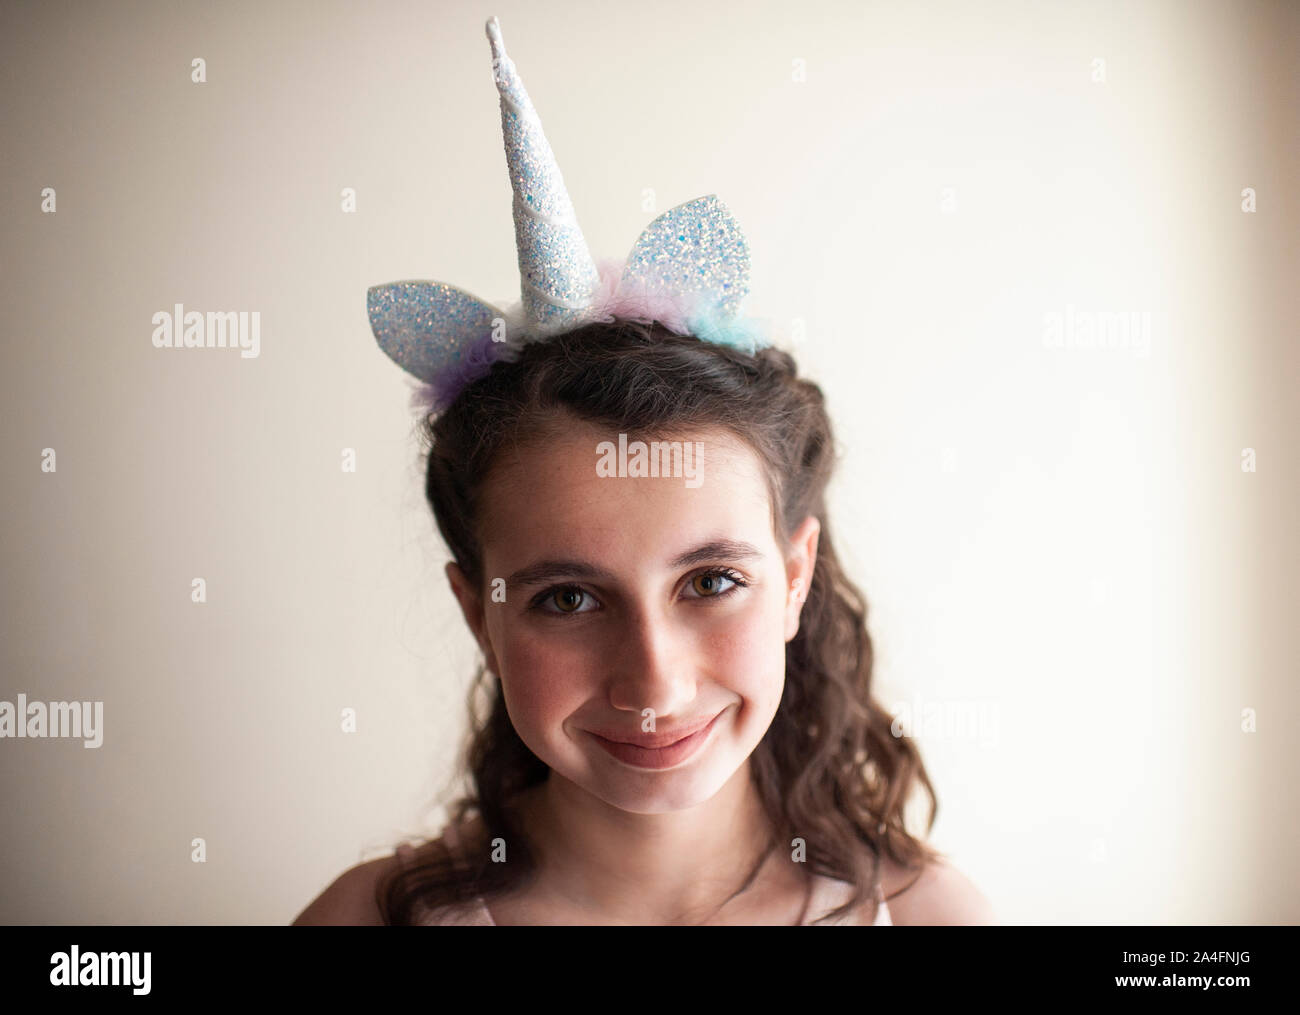 Close up of girl 10-12 years old smiling with unicorn headband on Stock Photo